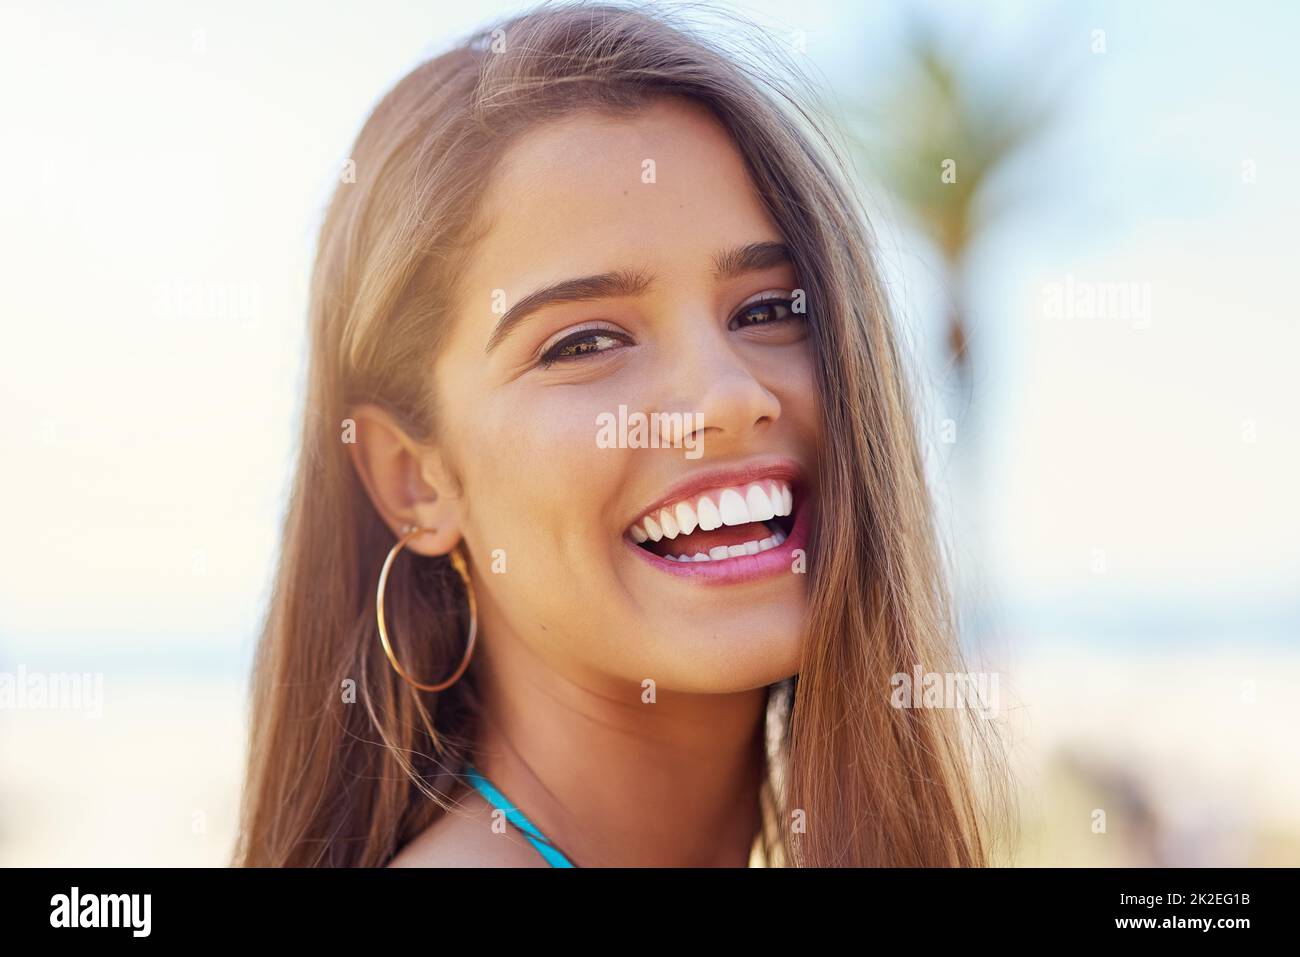 The beach is the only place I need to be. Portrait of an attractive young woman standing outside on a sunny day. Stock Photo